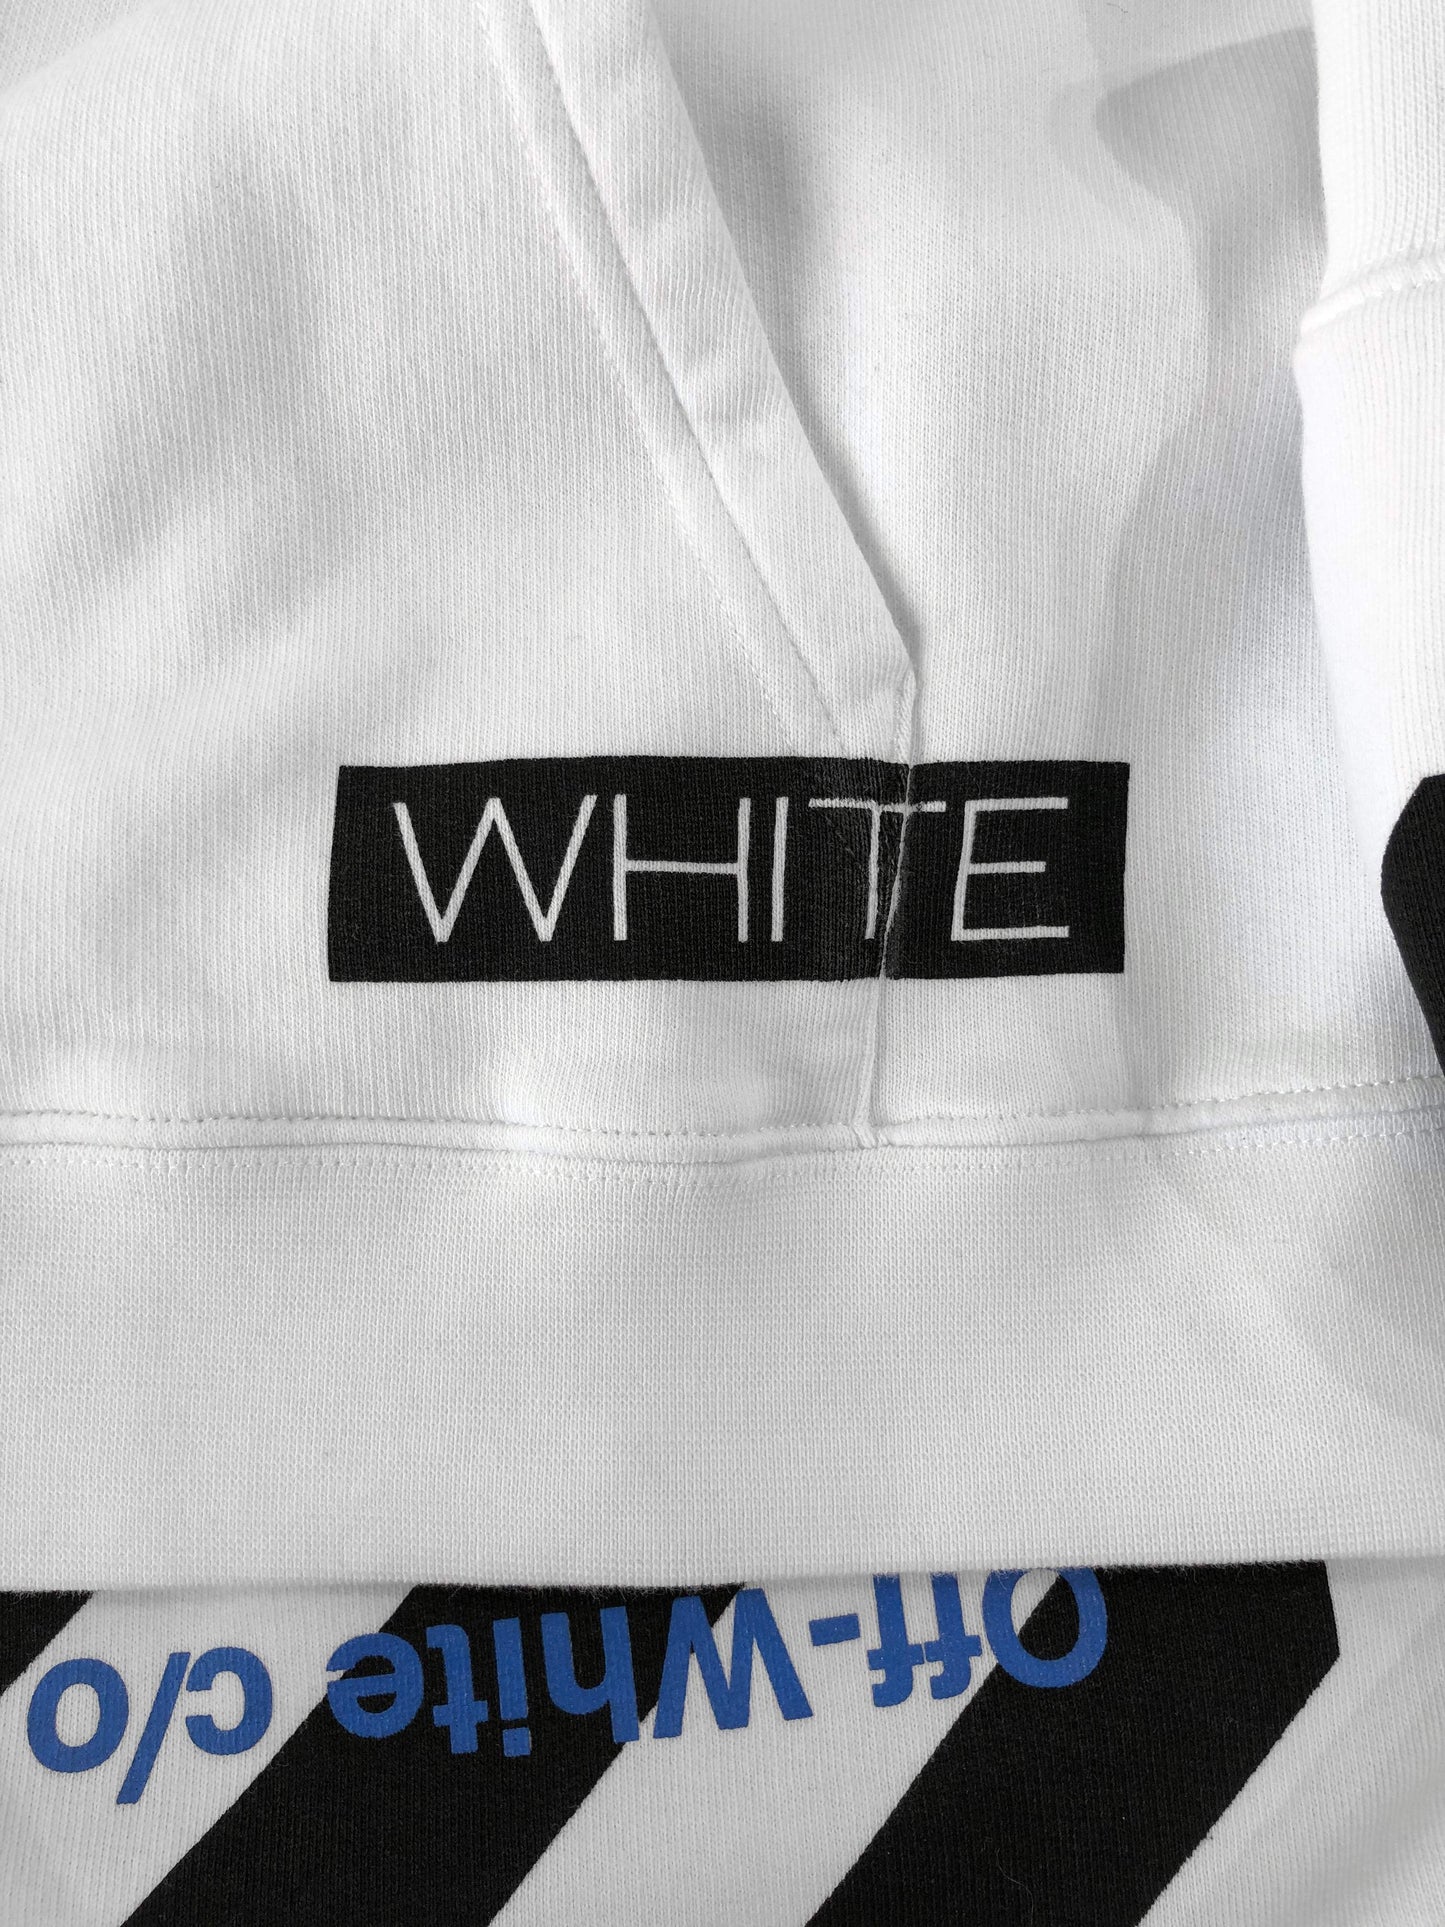 Off White Blue Collar White Hoodie Sweatshirt SS18 Collection